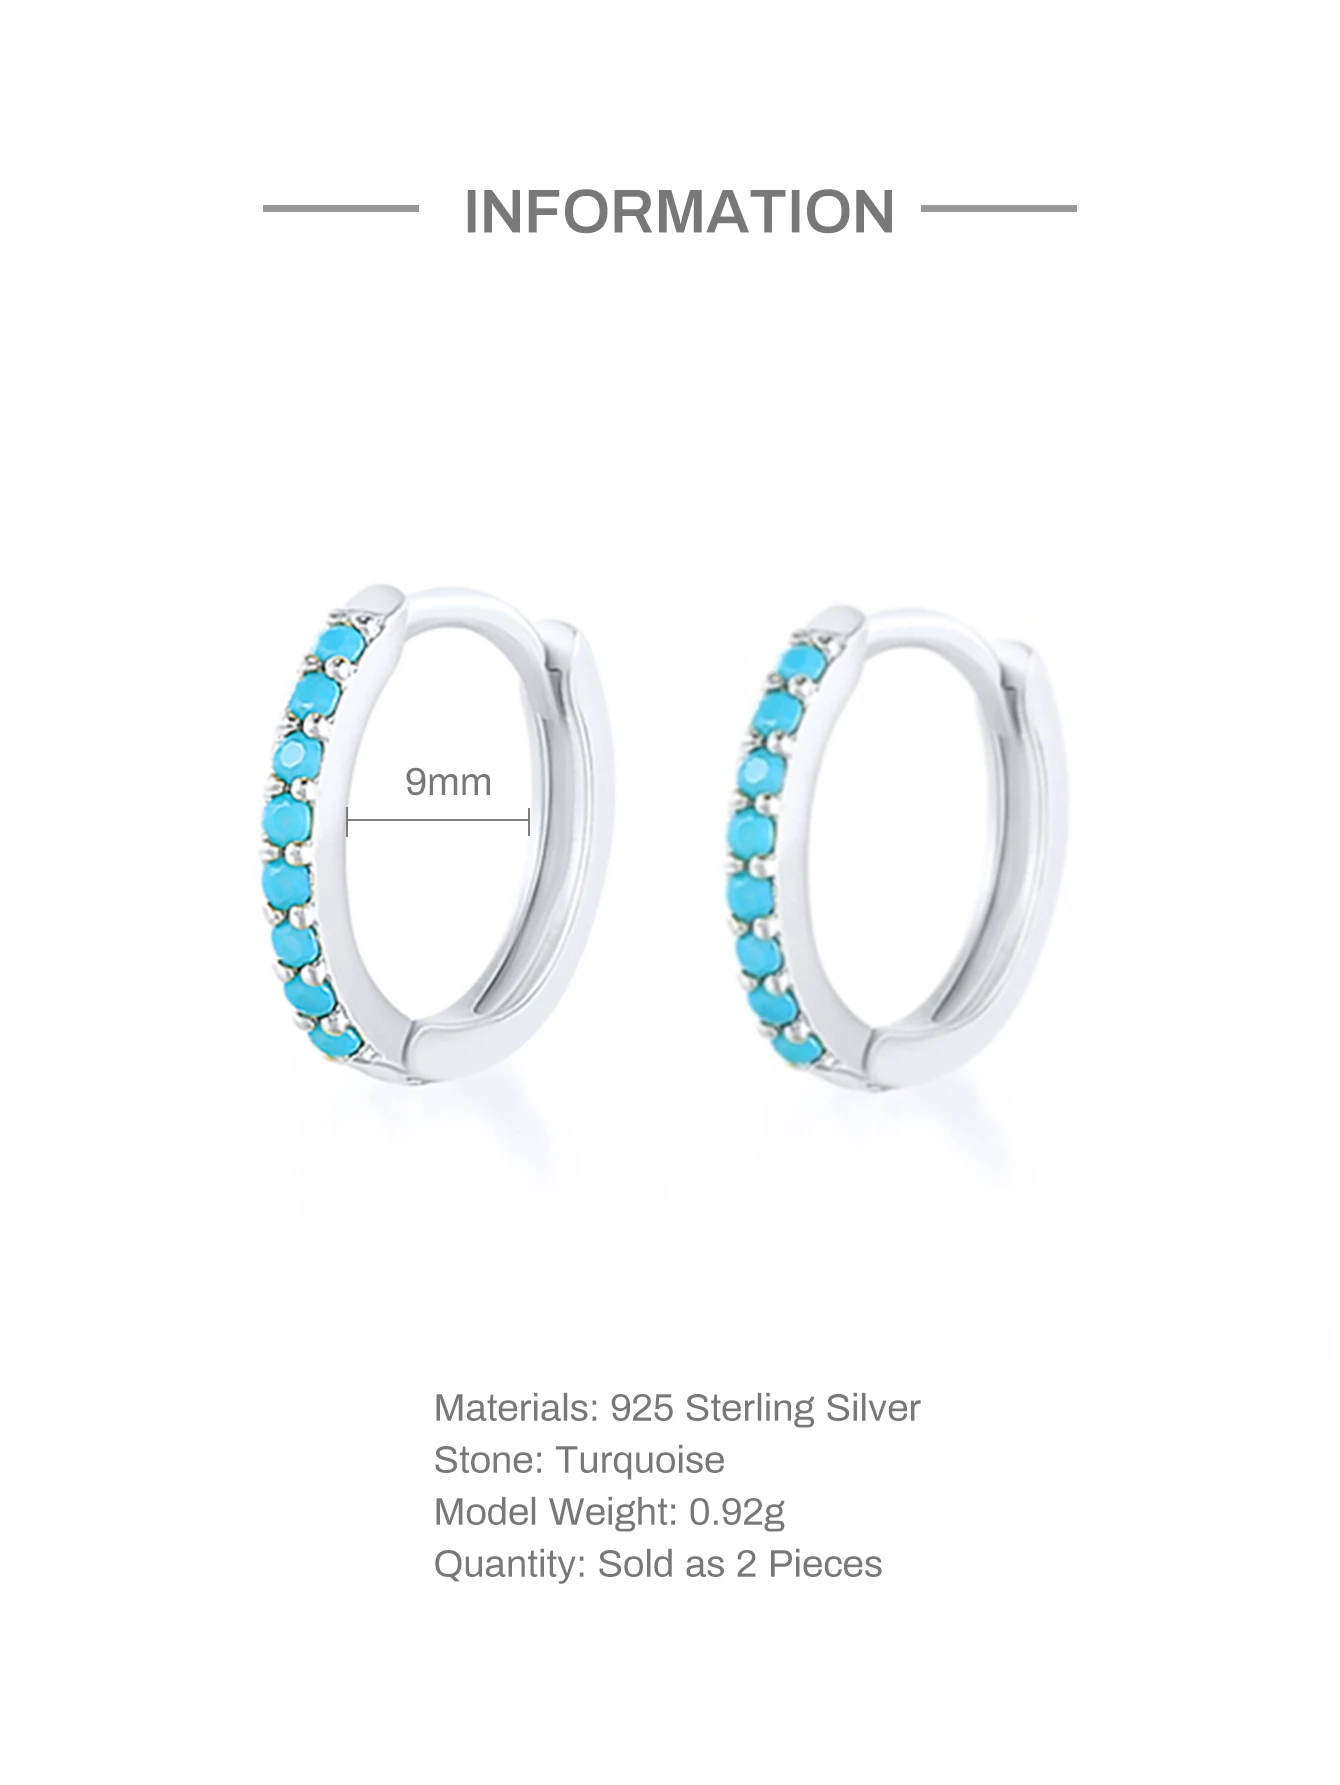 ROXI Turquoise Stone Hoop Earrings For Women Couple Small Circle Body Piercing Girl aretes ear hoops 925 Sterling Silver Jewelry images - 6